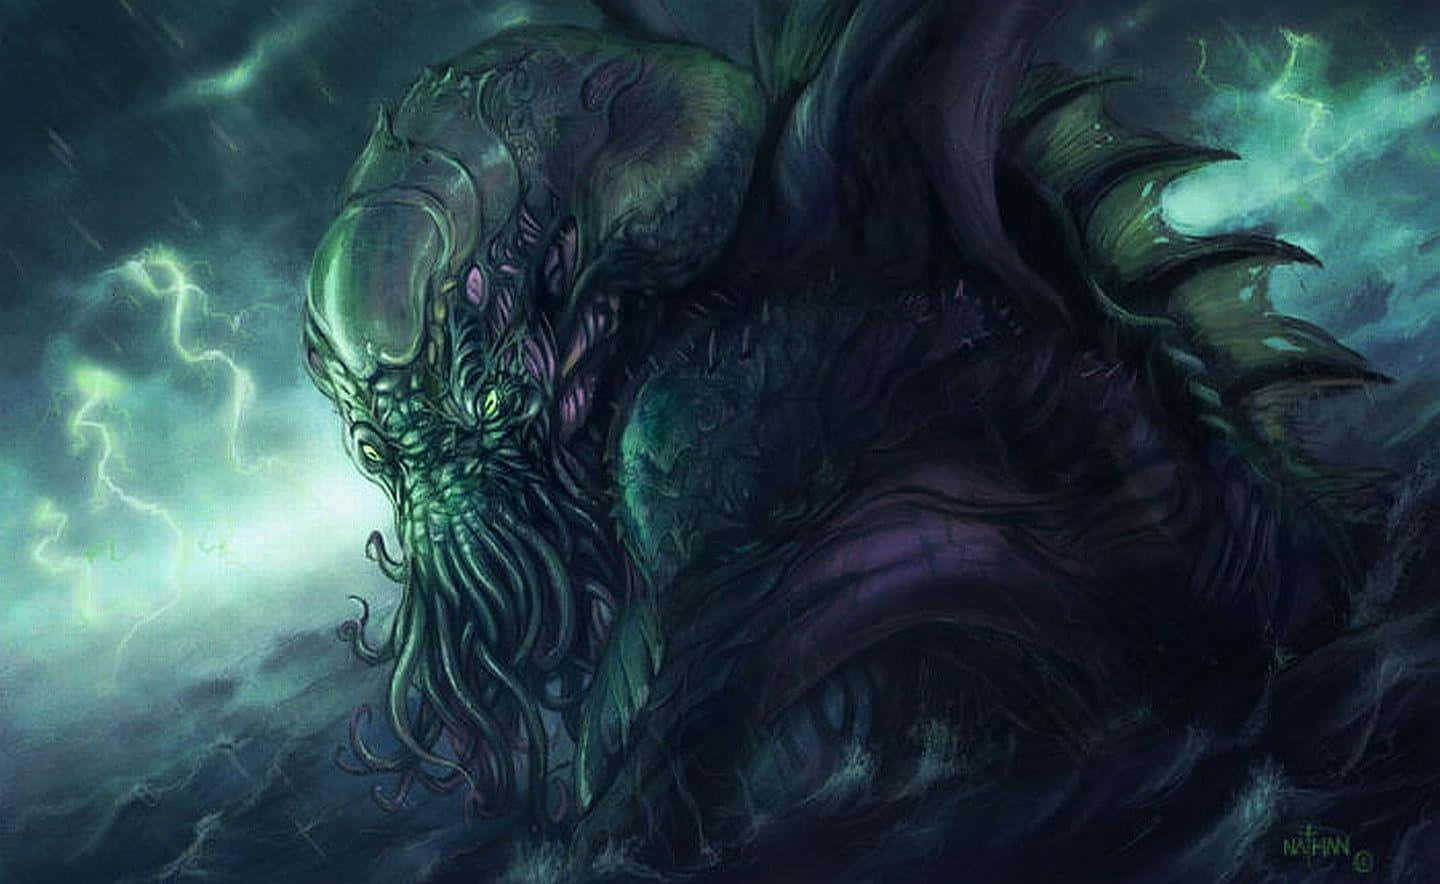 Unveil the terror of Cthulhu